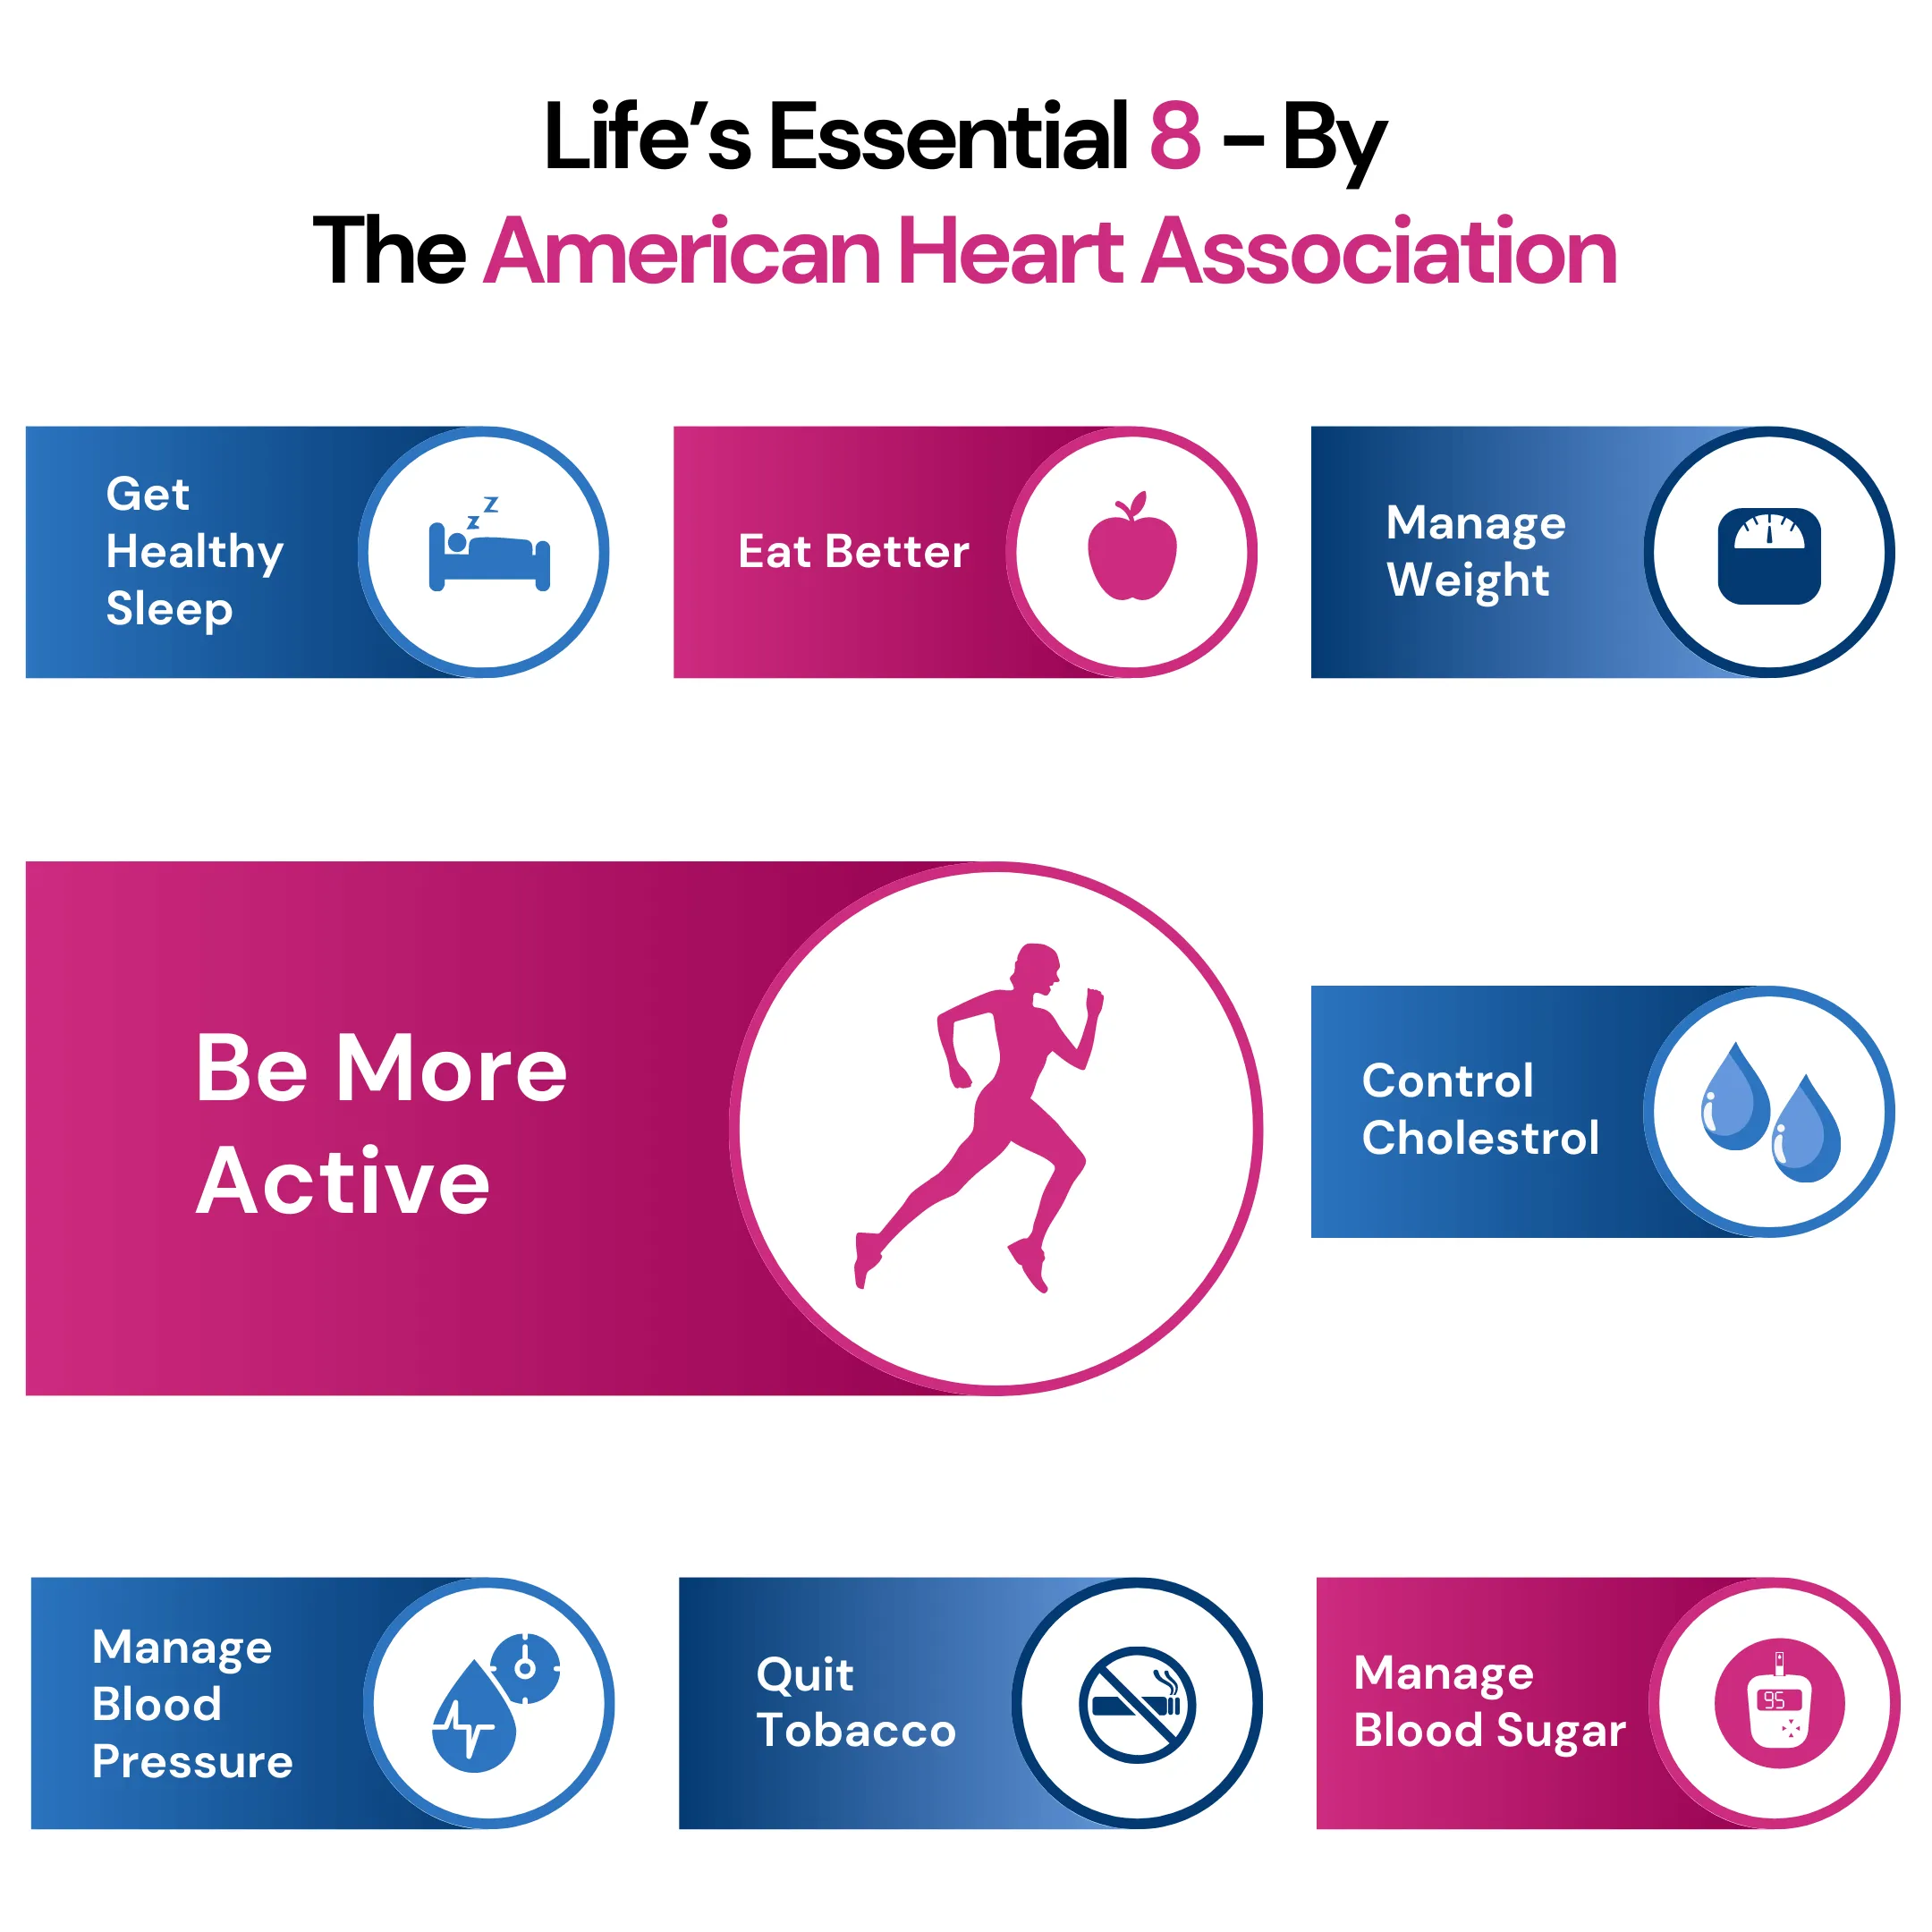 Life's Essential 8 - How to Be More Active Fact Sheet